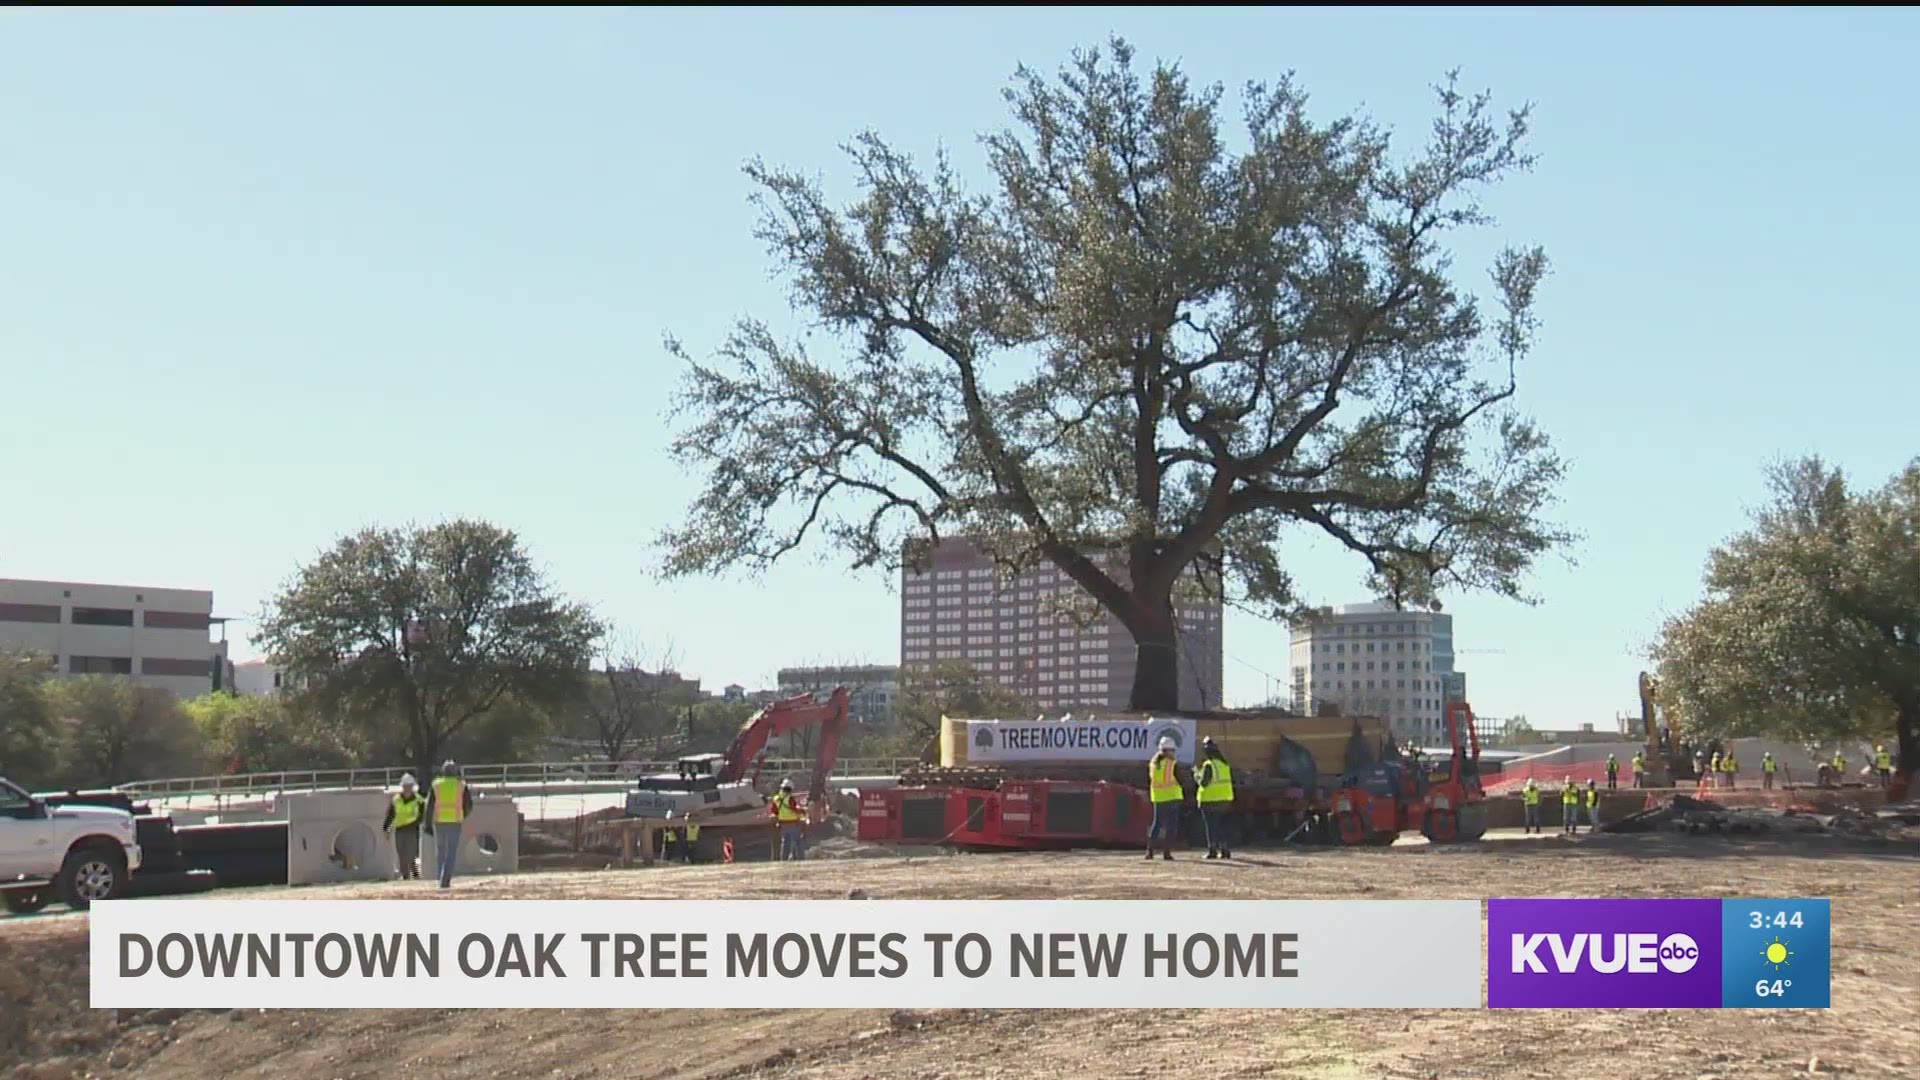 Sunday was moving day for a four-story live oak tree in Downtown Austin.